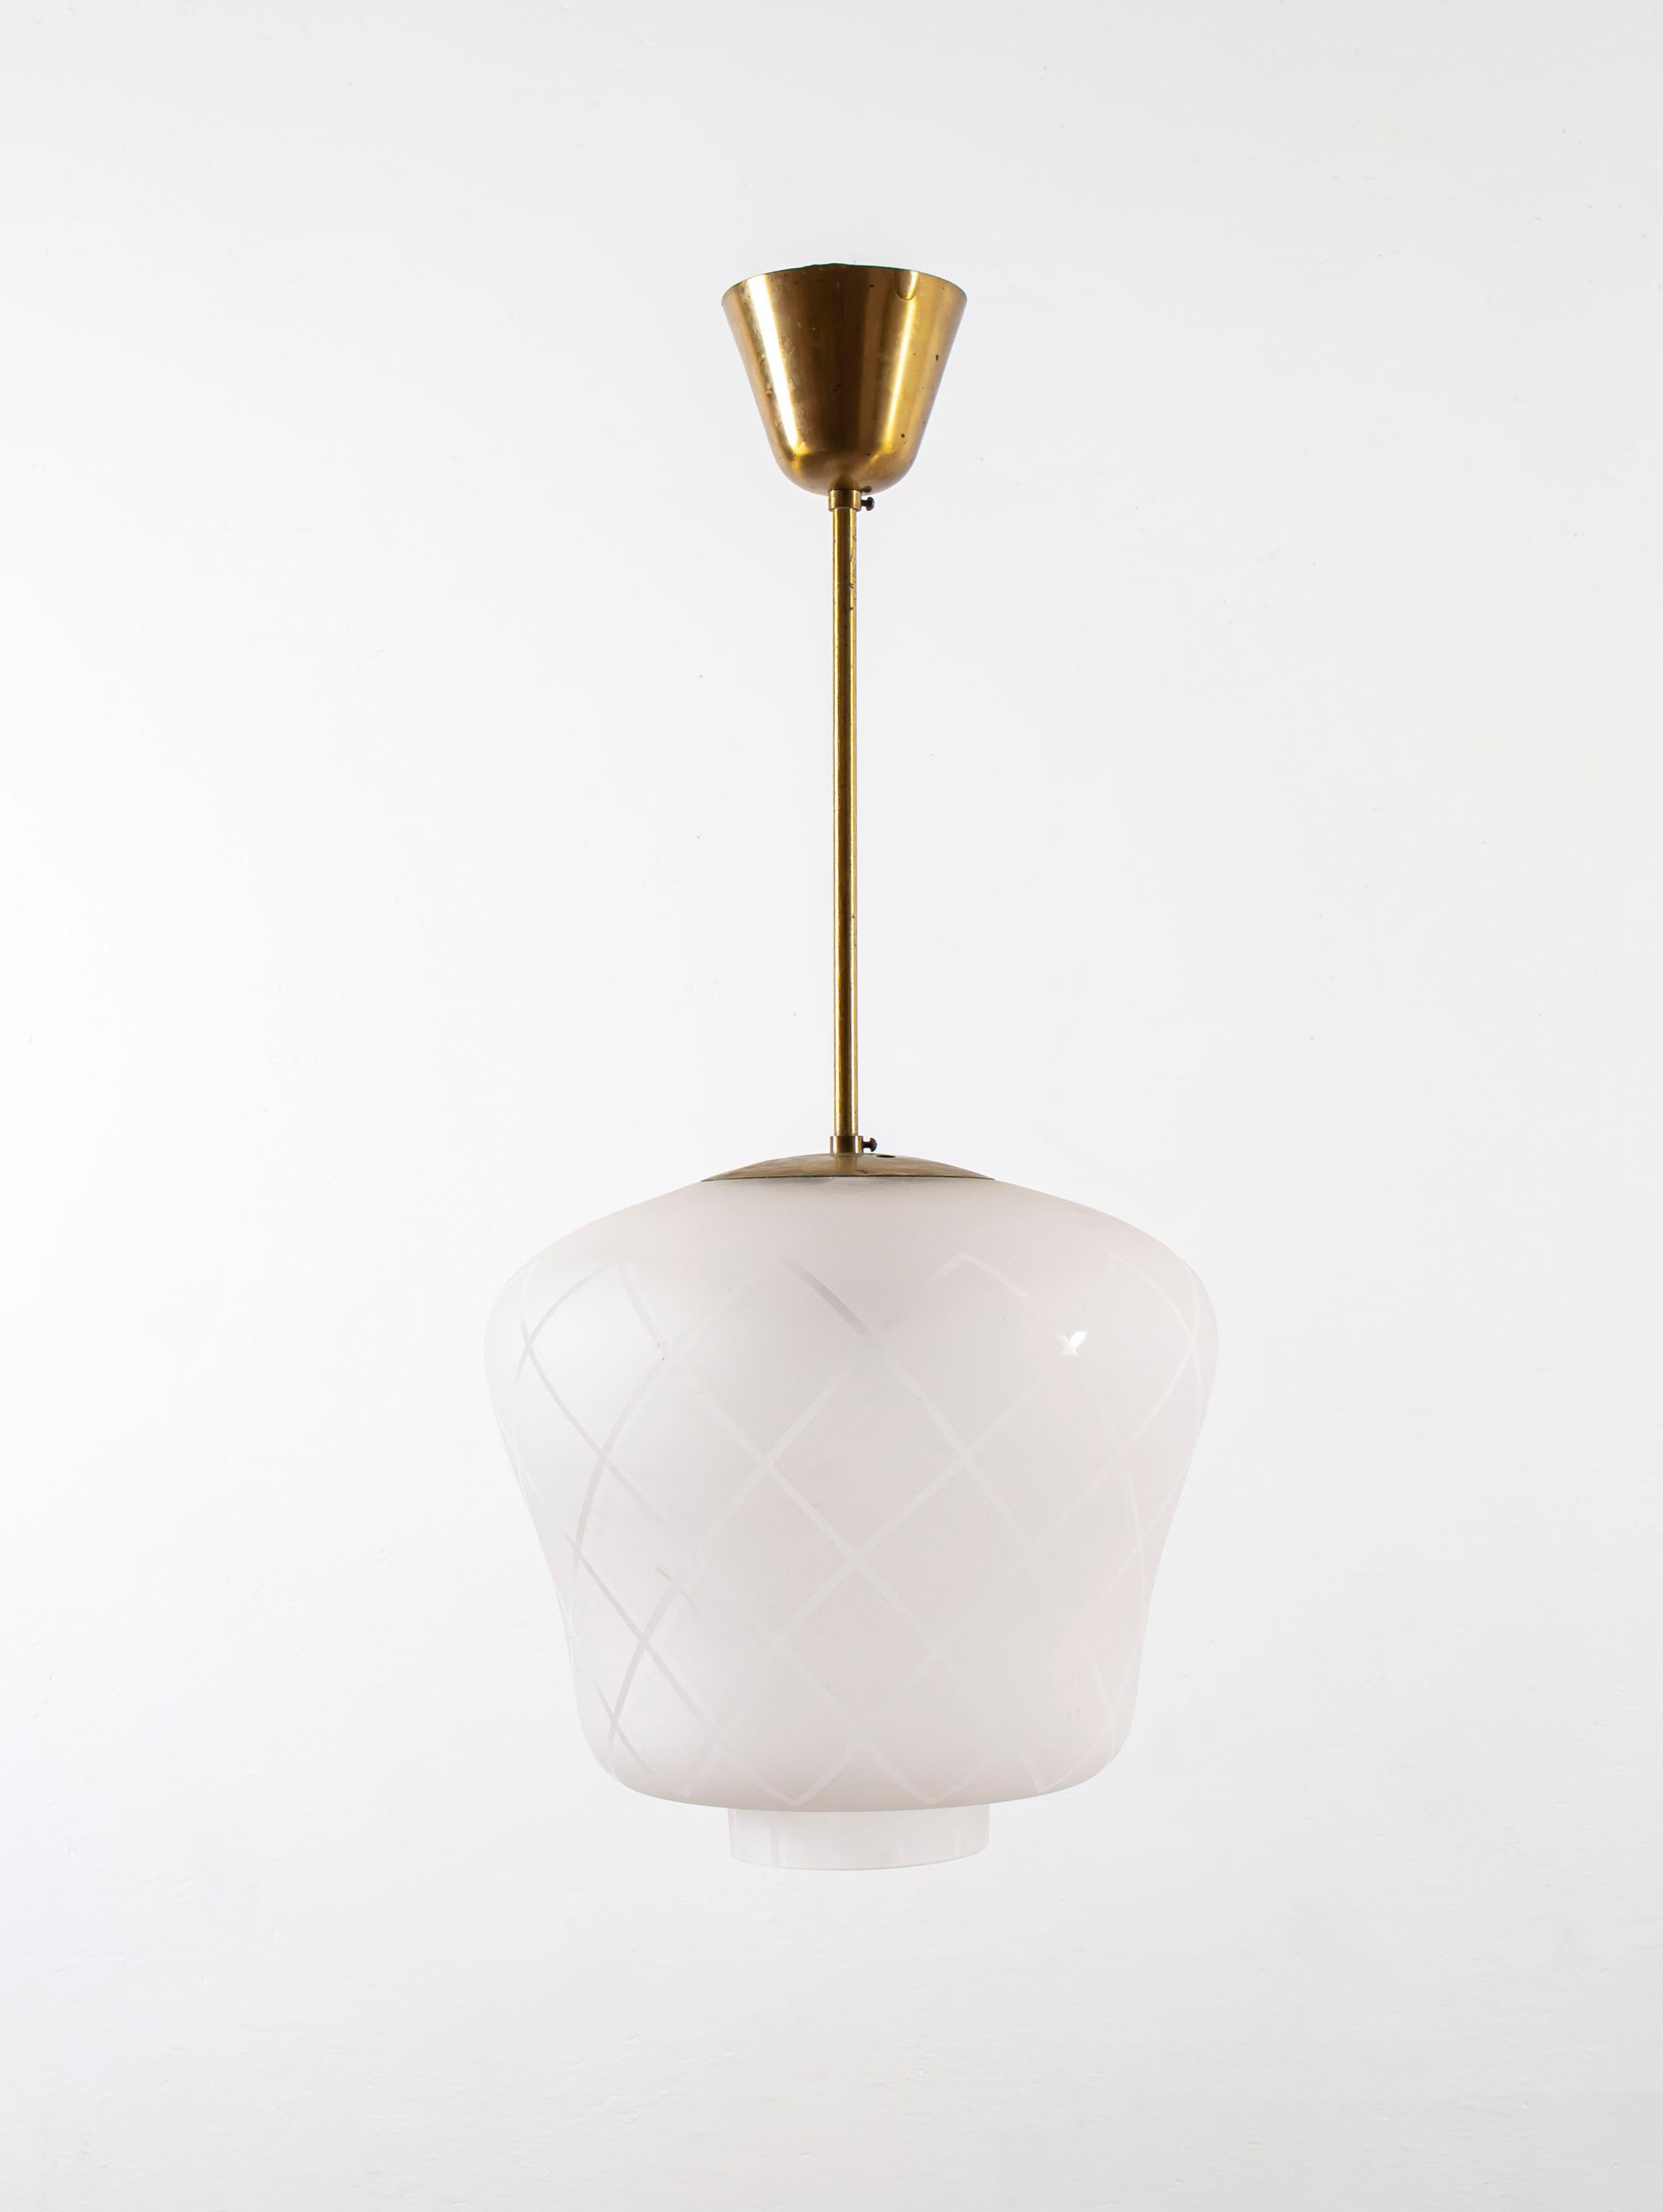 Wonderful ceiling lamp with a brass stem and cup. The shade is made in frosted glass with a decorated surface. Designed by Birger Dahl and made in Norway for Sønnico AS from circa 1960s first half. The lamp is fully working and in very good vintage